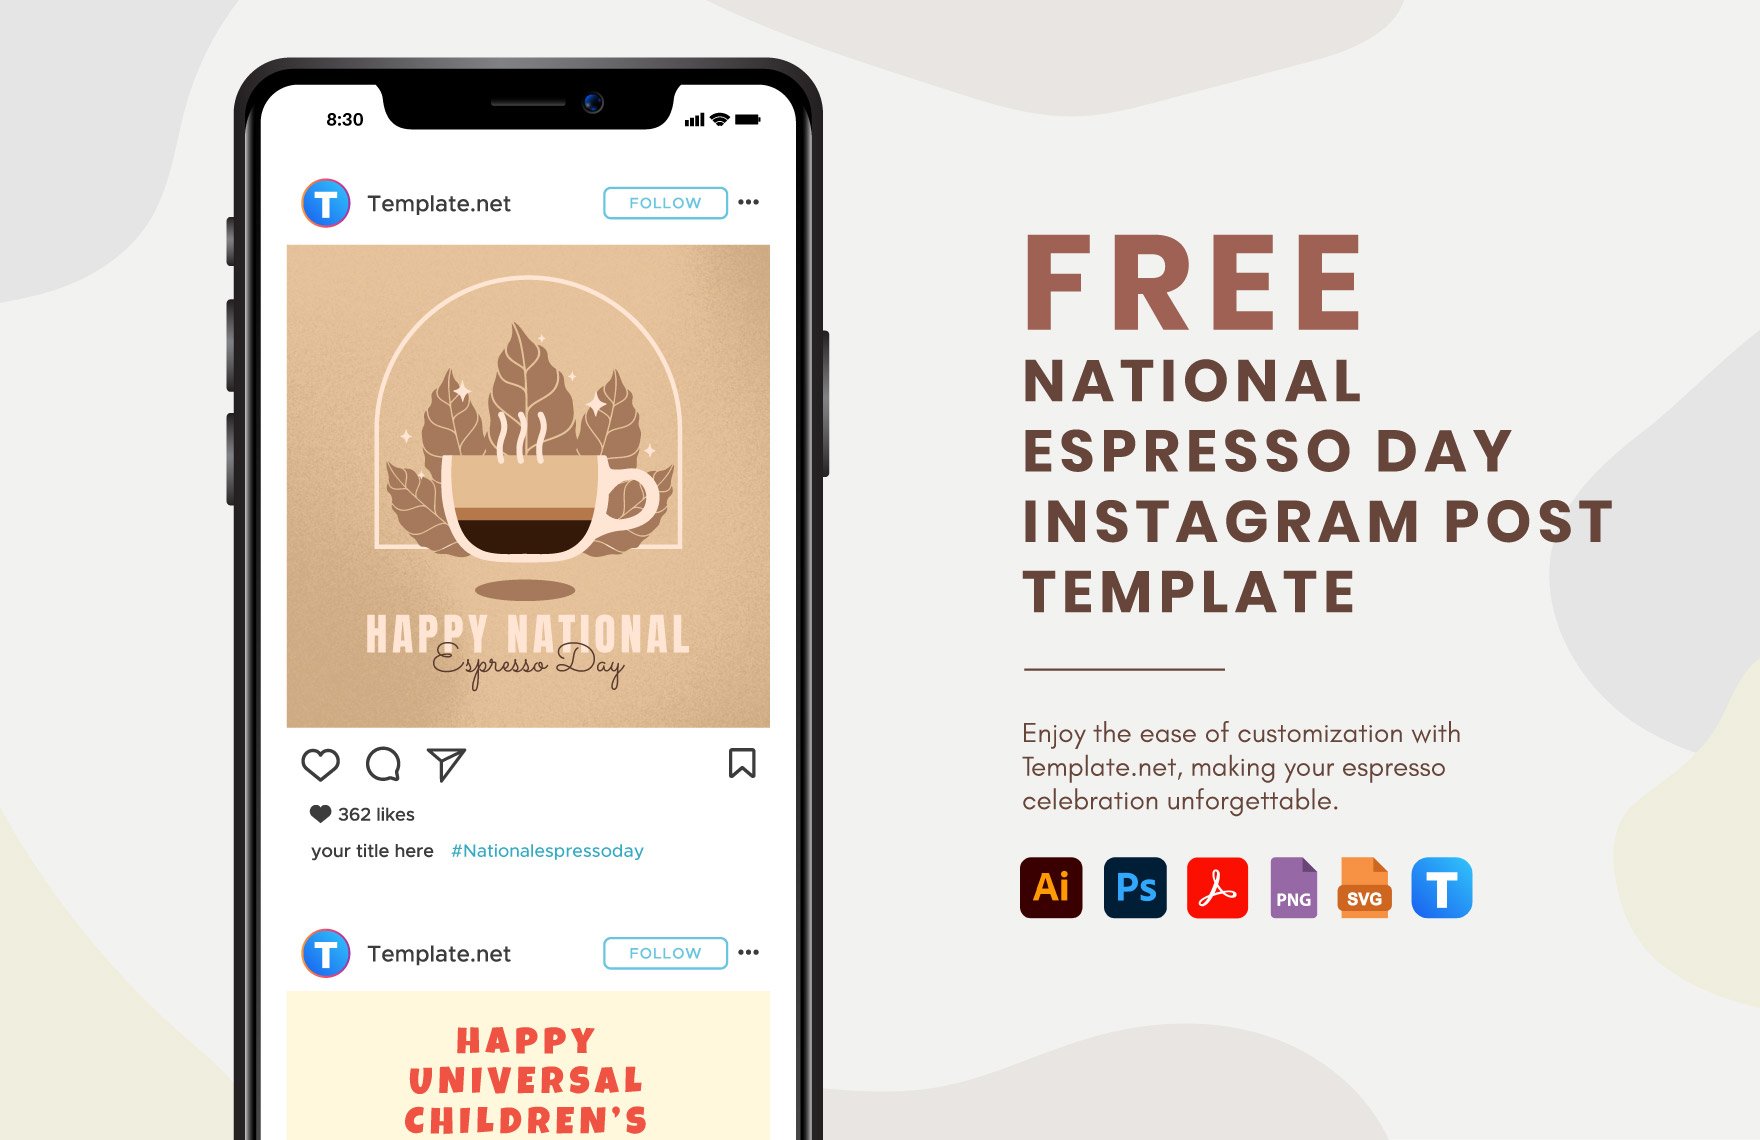 Free National Espresso Day Instagram Post Template in PDF, Illustrator, PSD, SVG, PNG